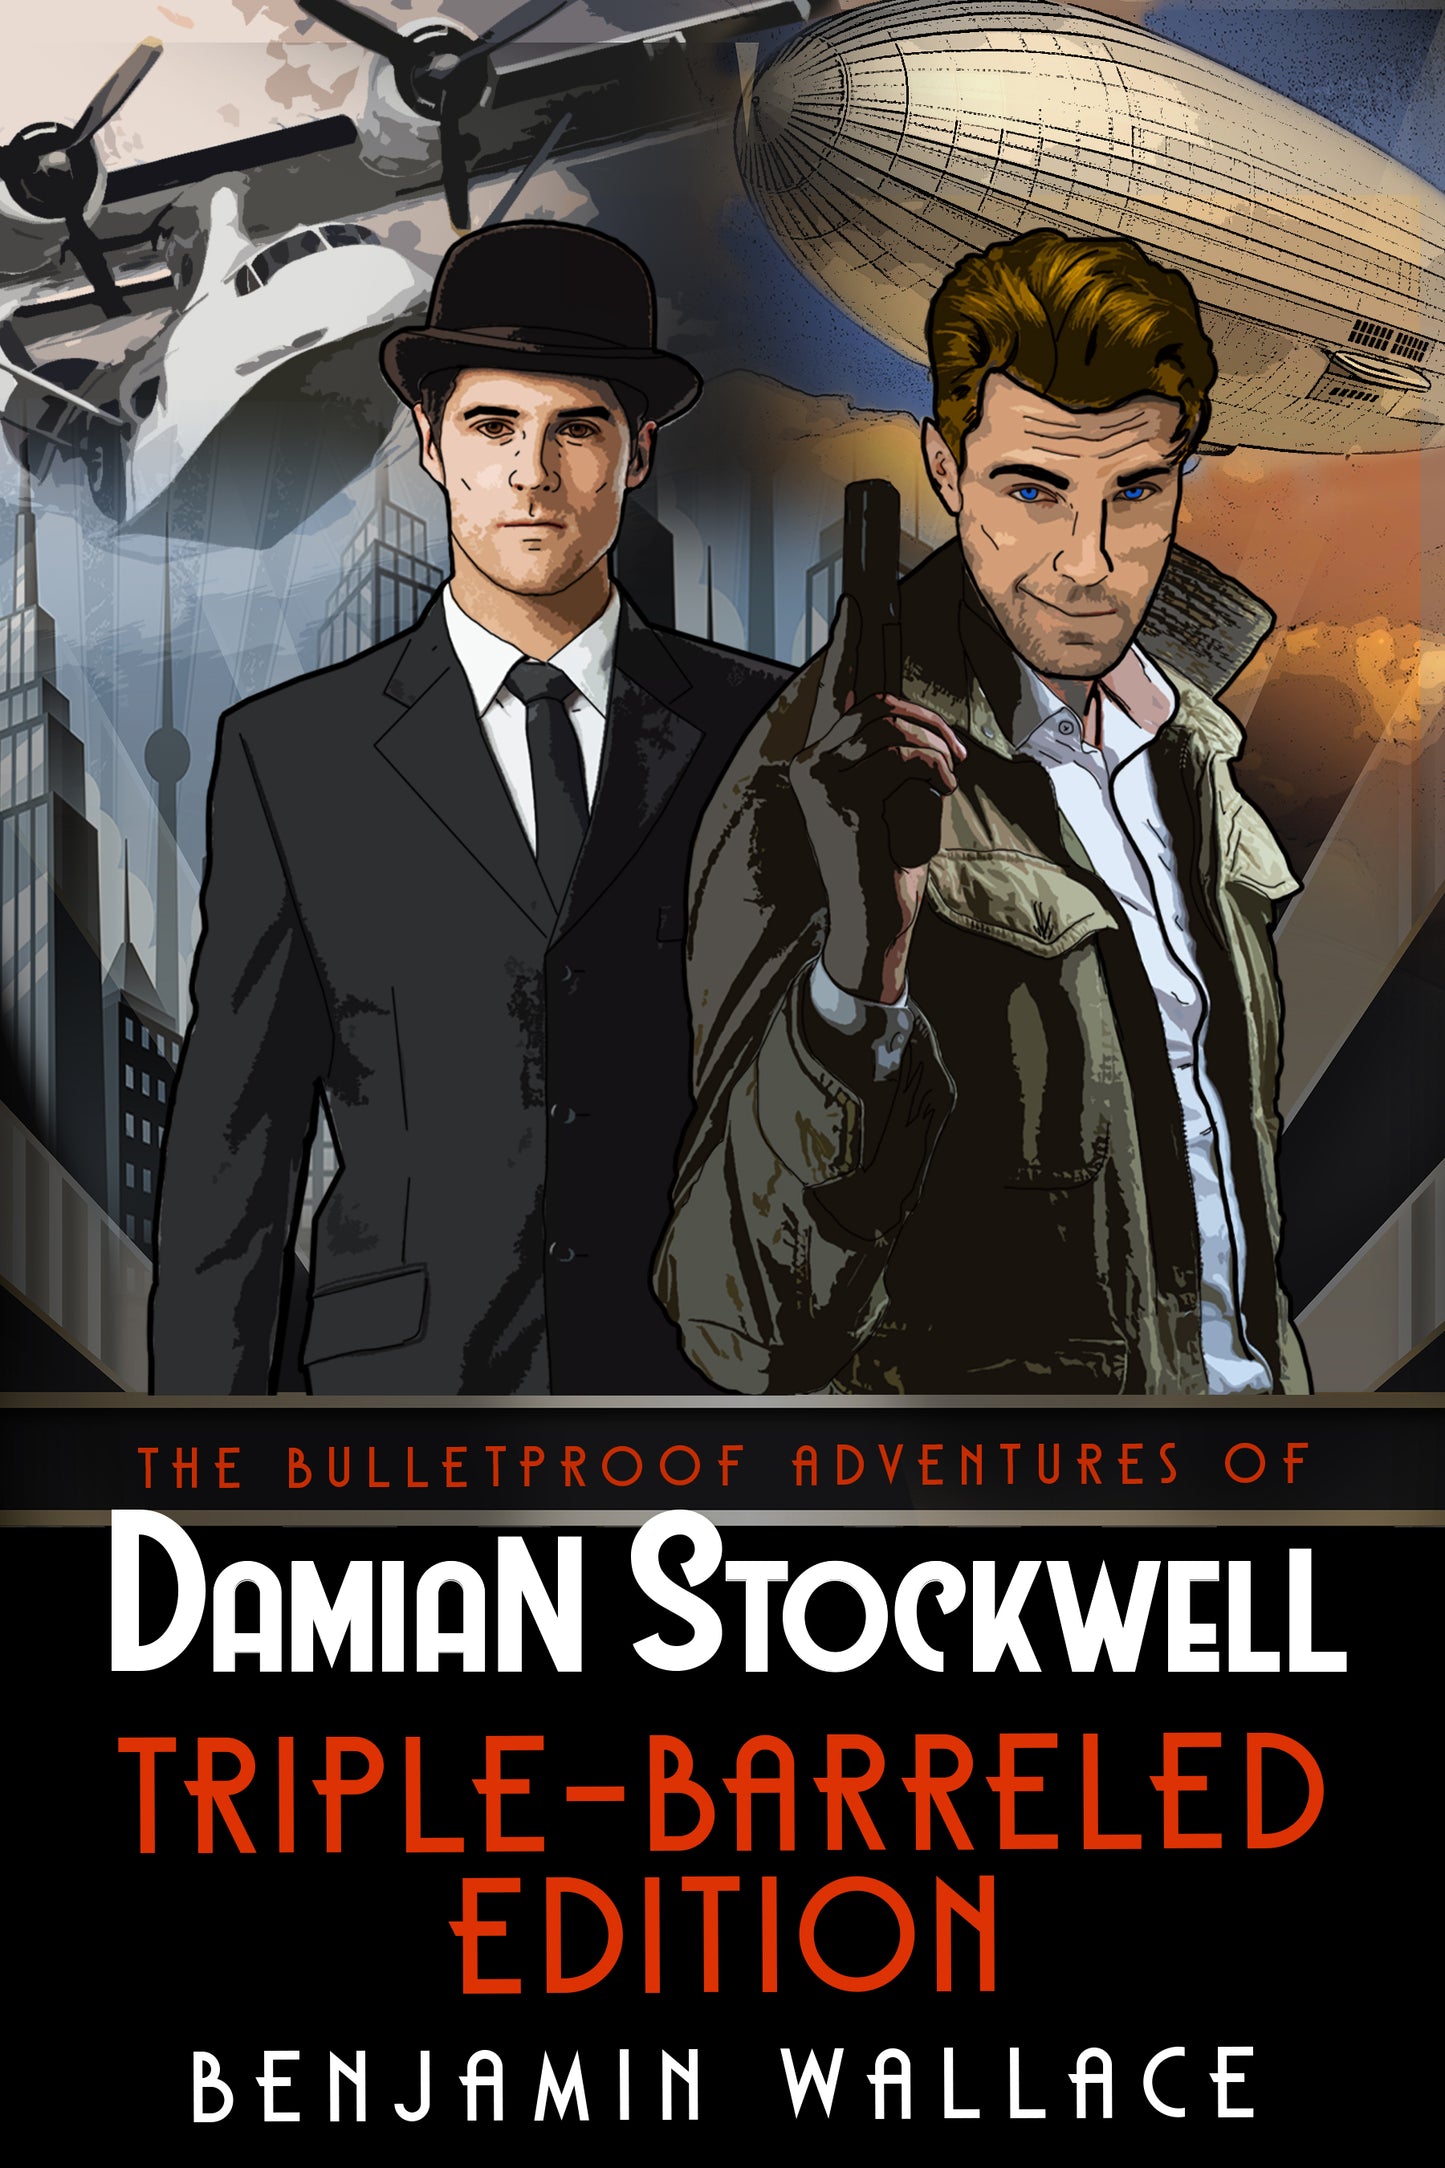 Triple-Barreled Edition - The Bulletproof Adventures of Damian Stockwell, Books 1-3 (Kindle and ePub)